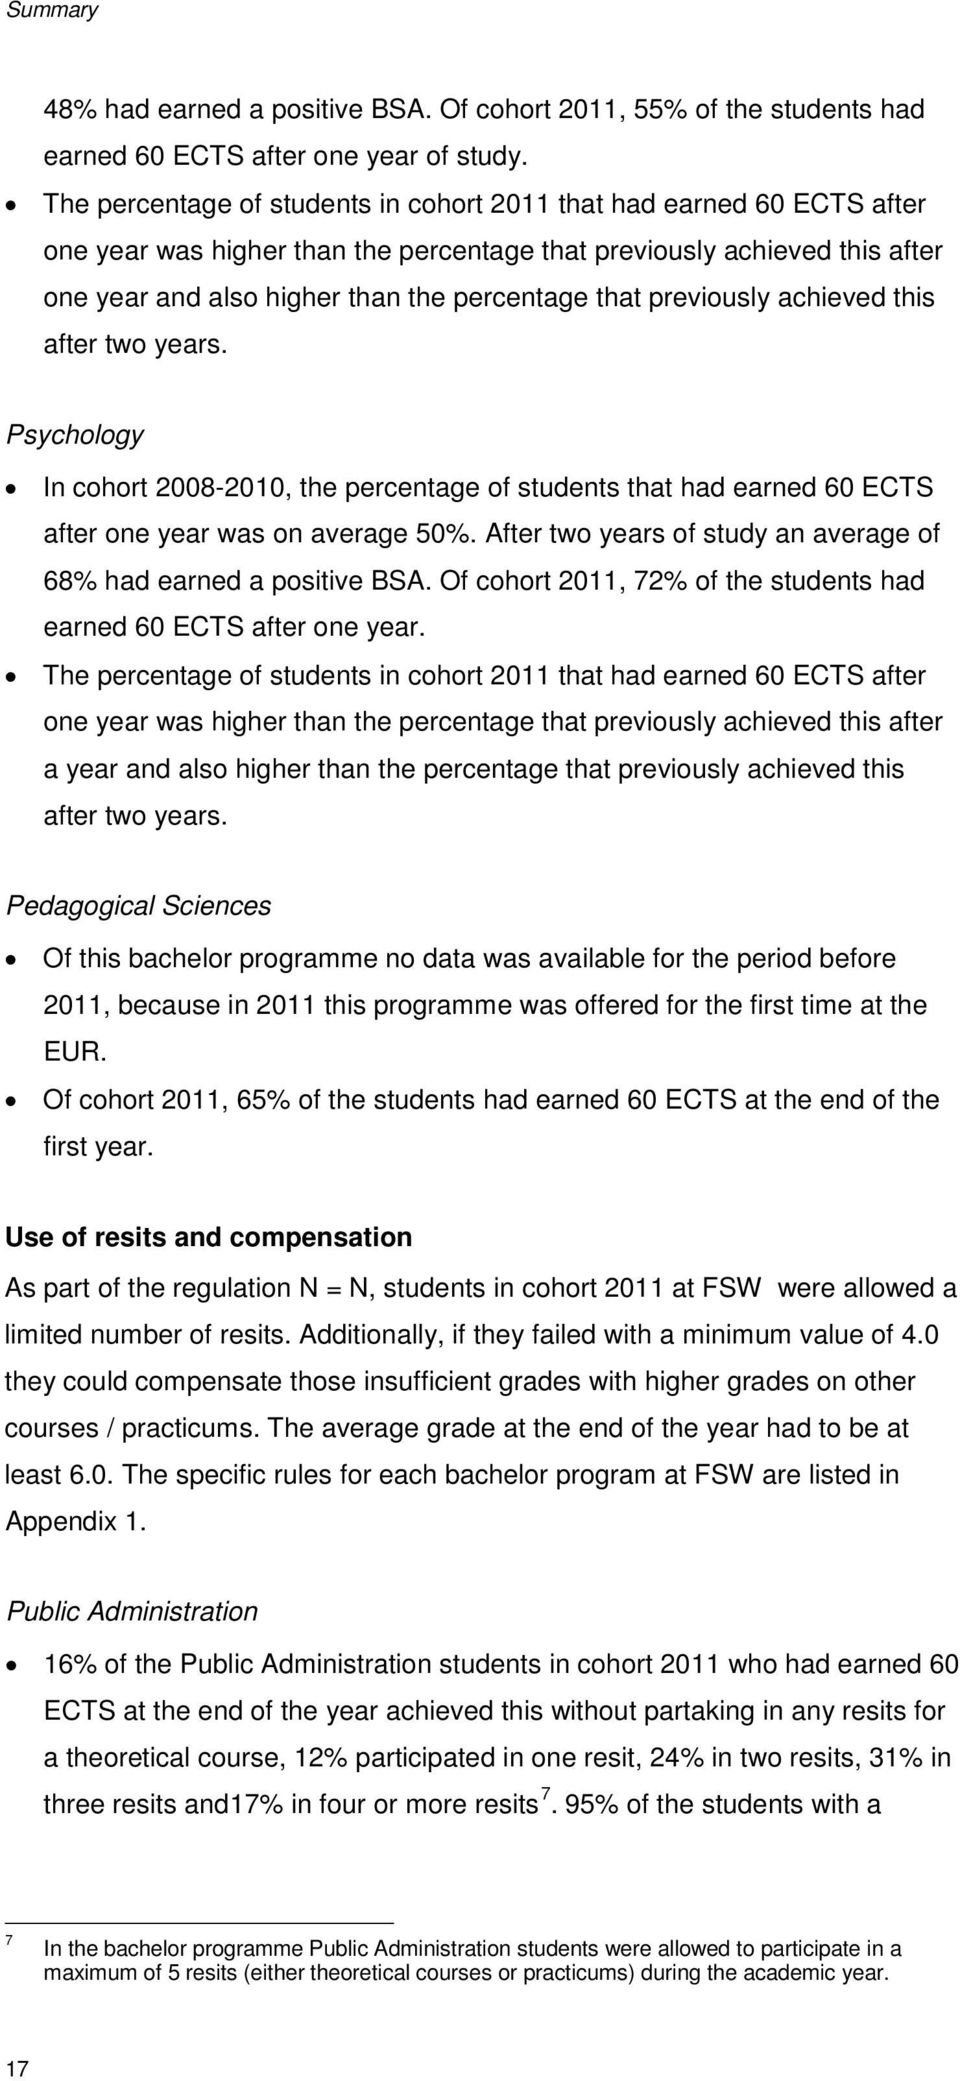 previously achieved this after two years. Psychology In cohort 2008-2010, the percentage of students that had earned 60 ECTS after one year was on average 50%.